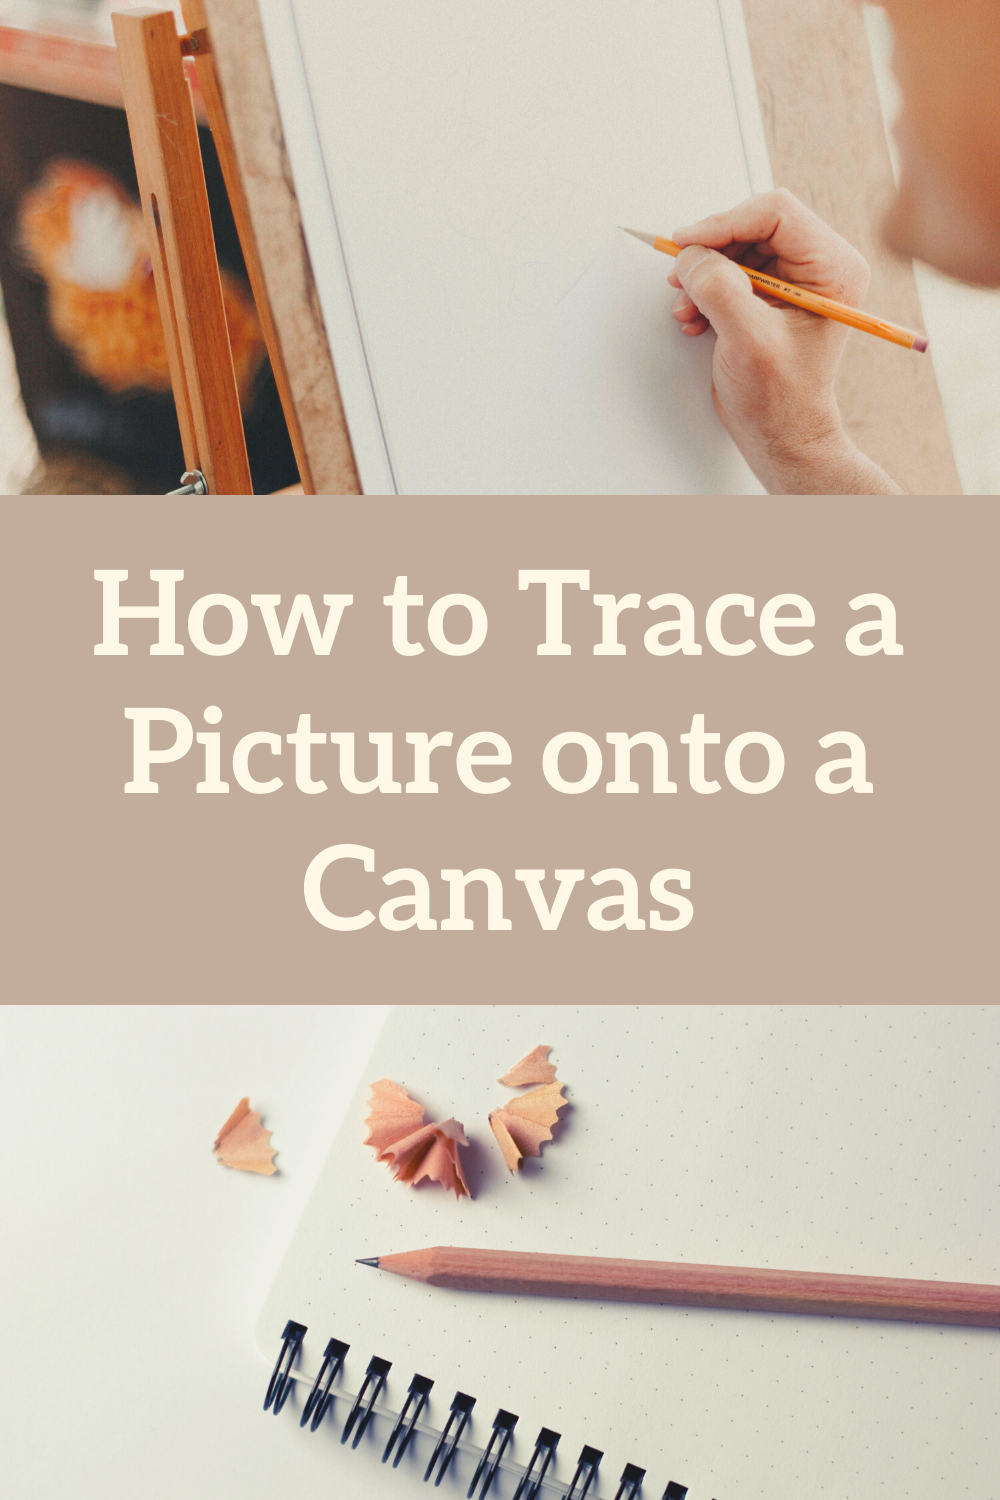 How To Trace A Picture onto a Canvas